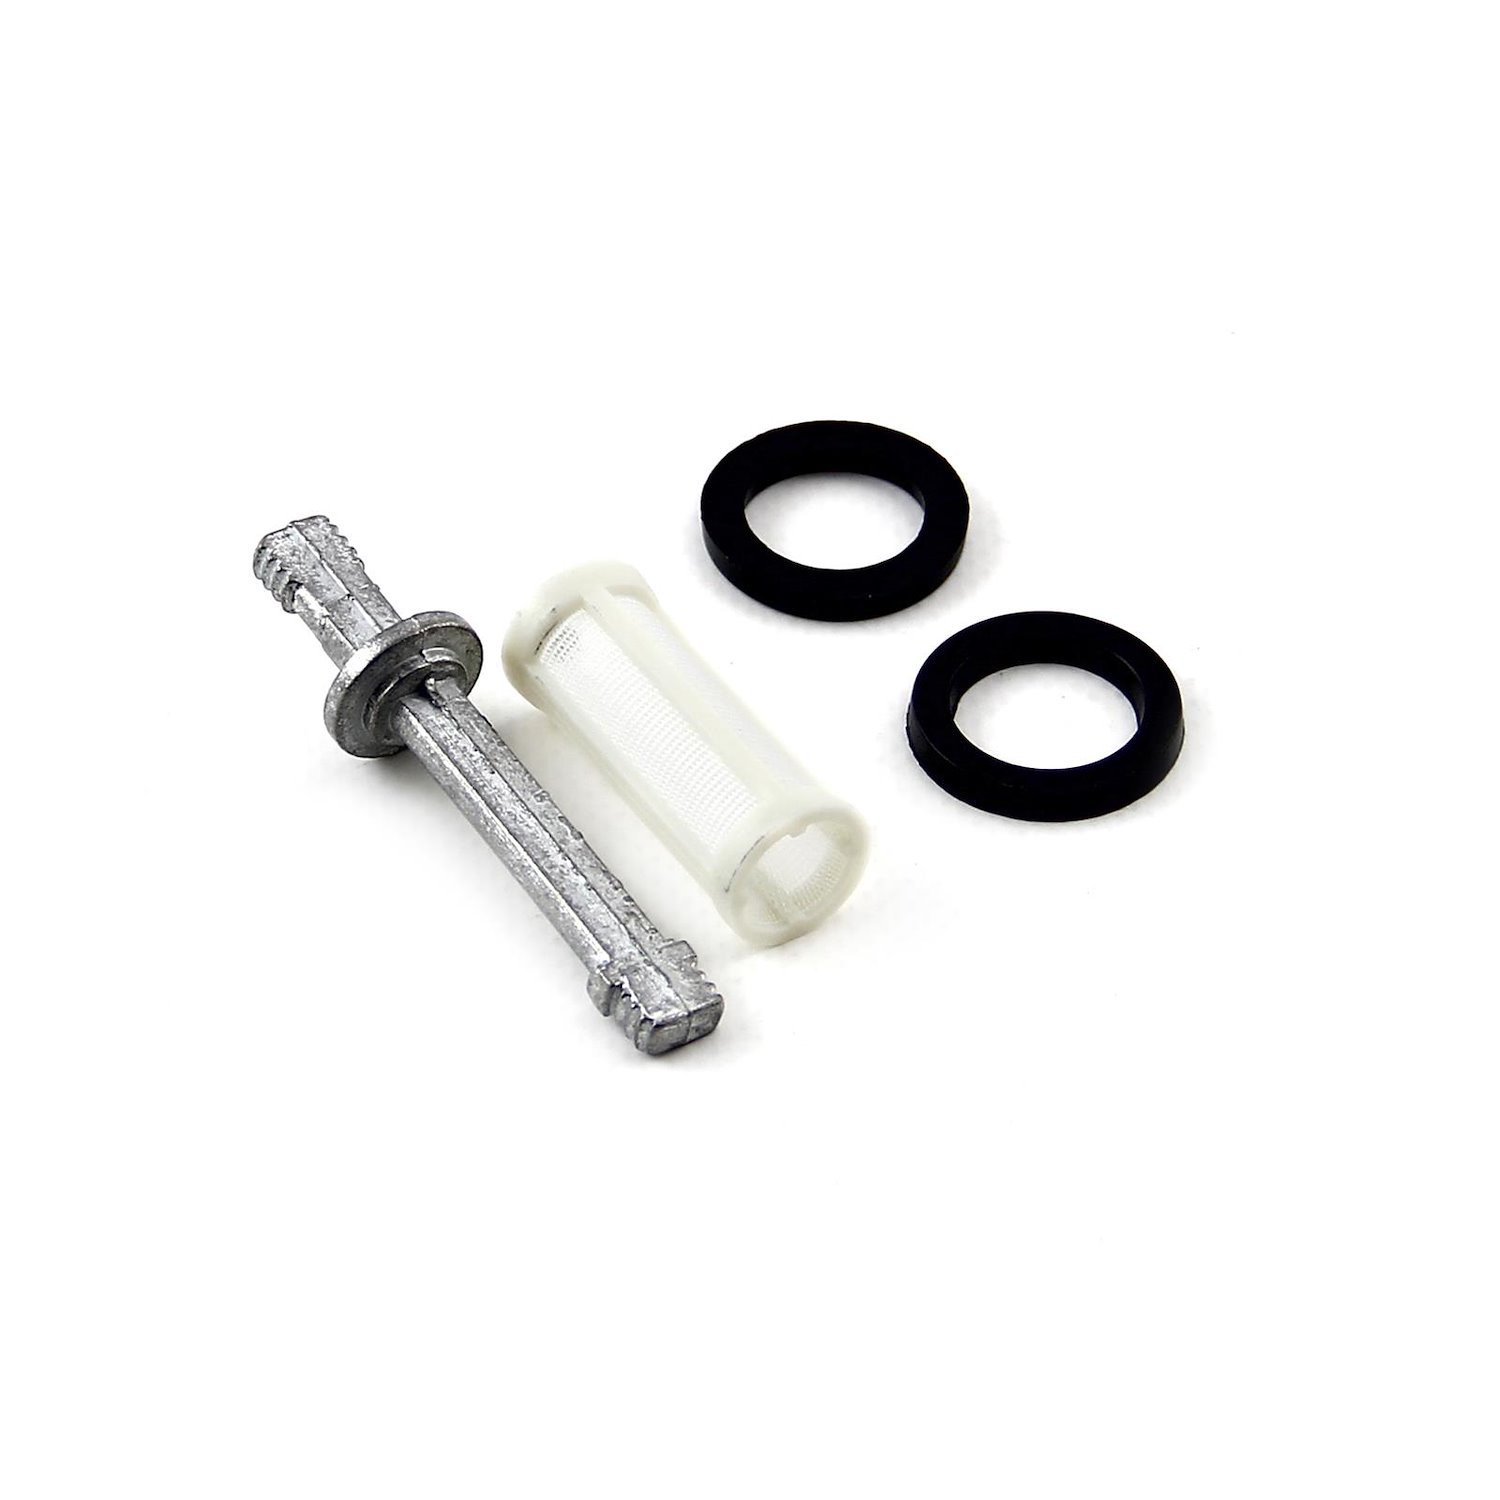 Fuel Filter Replacement Parts Kit